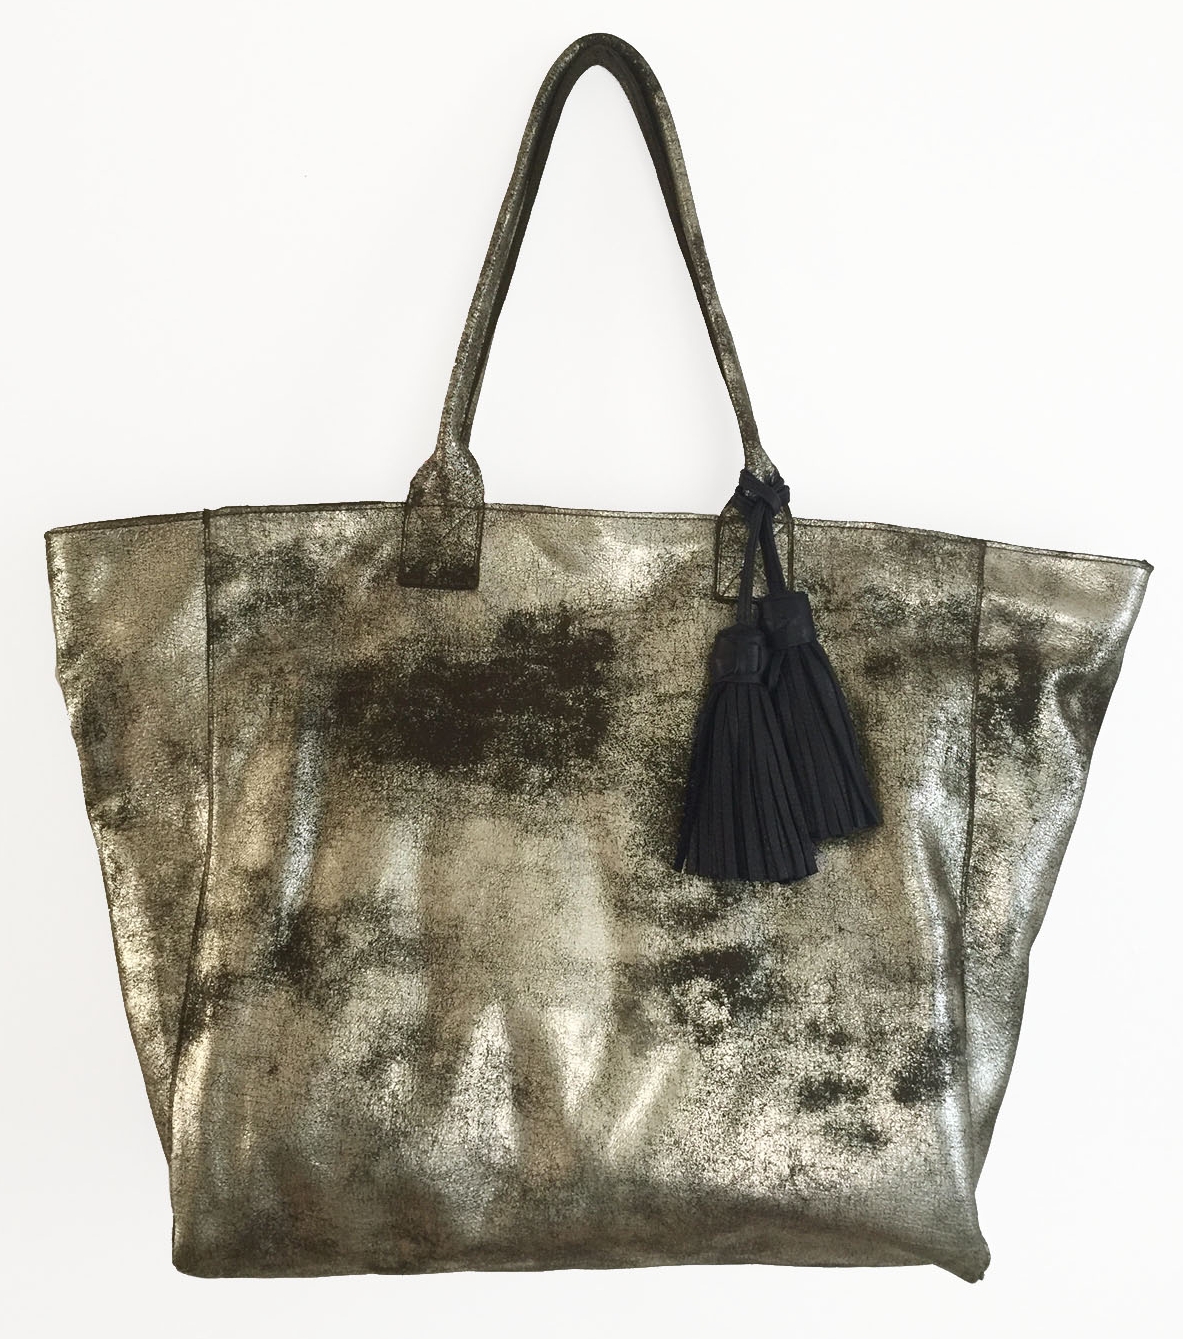 NOHA Tote in Gray Camouflage leather with hand painted center stripes in  Cream/Black/Cream. Initials and star in gold metallic — NOT RATIONAL